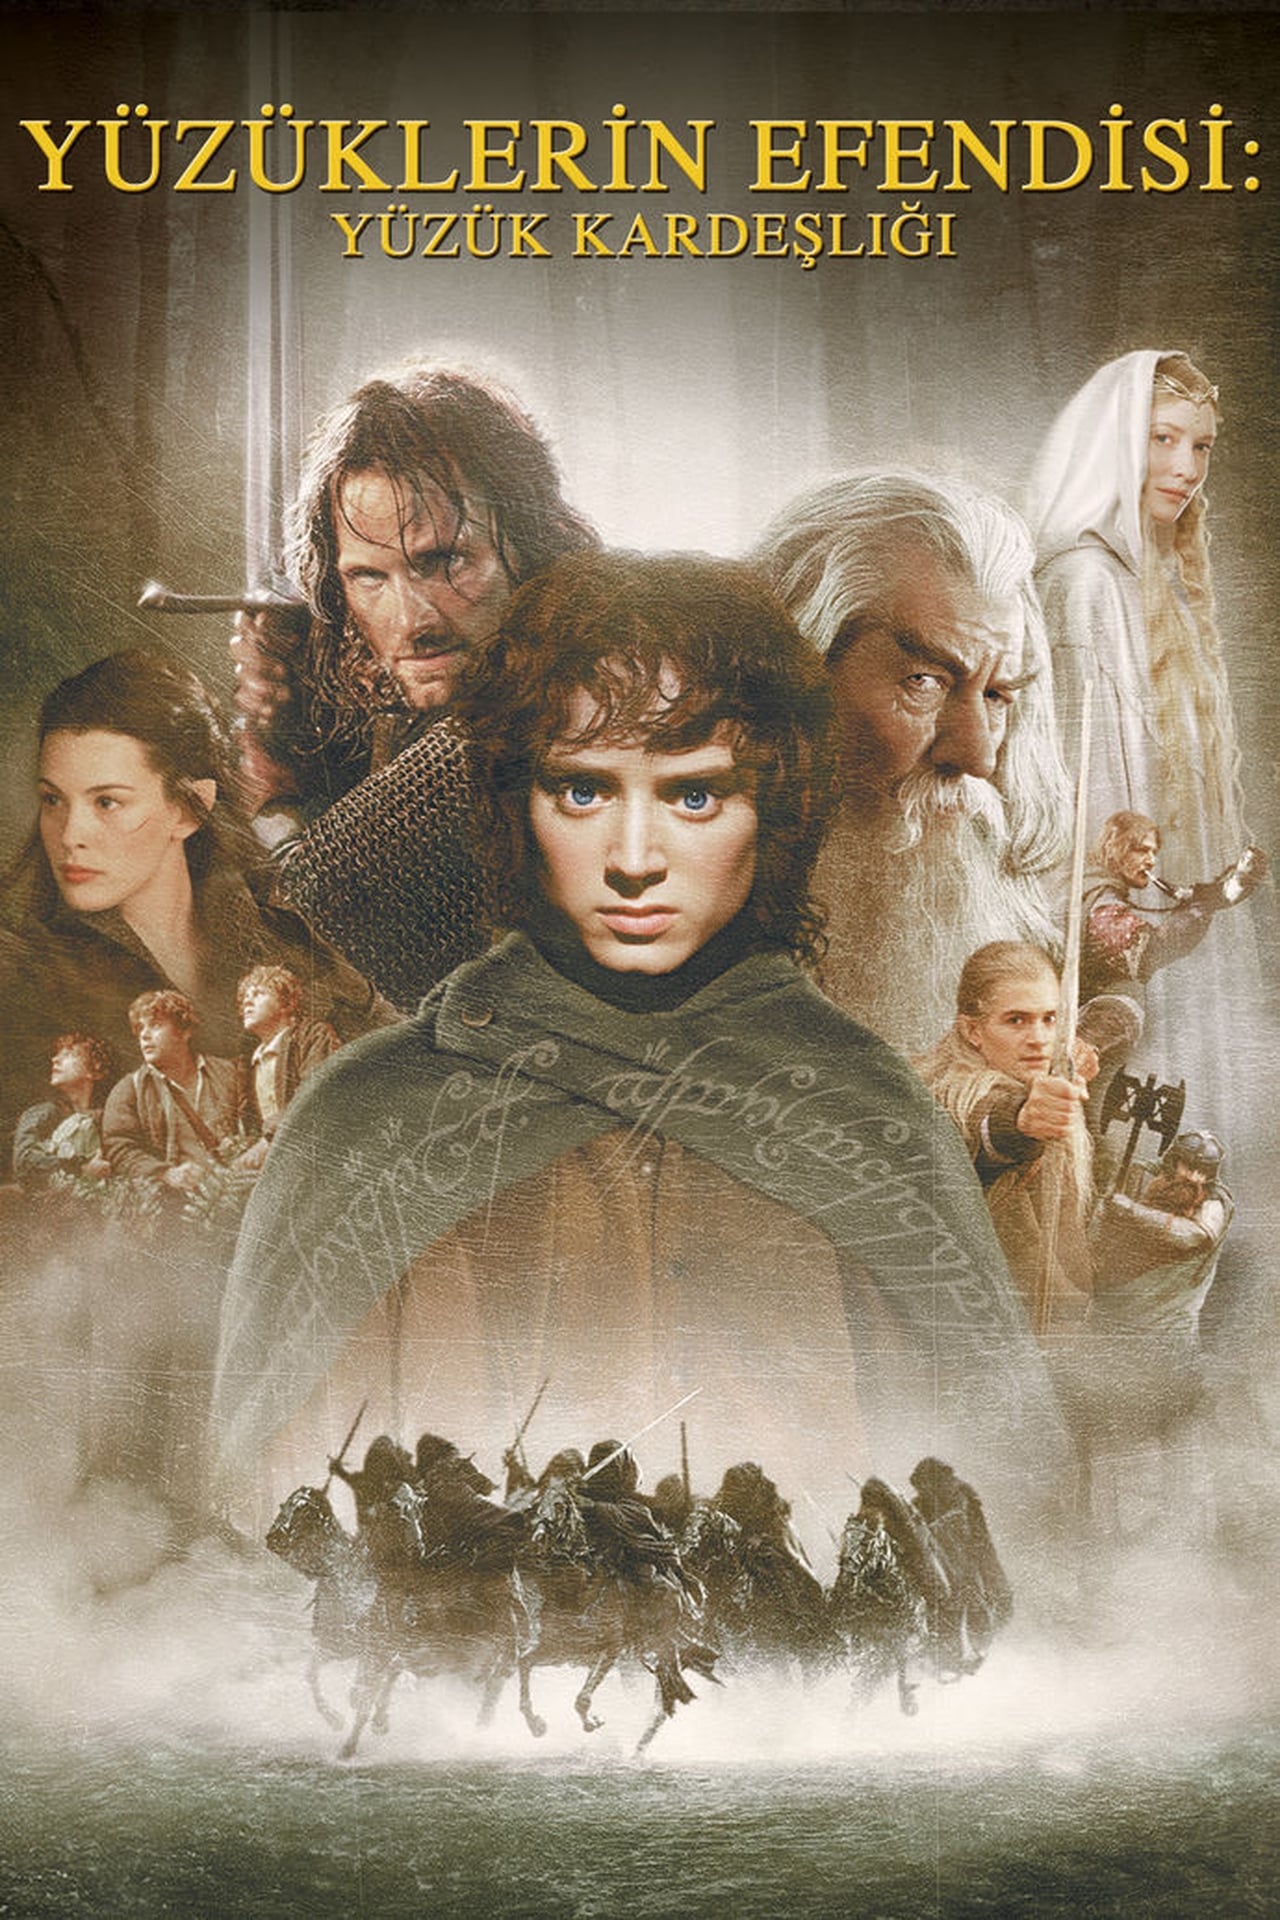 The Lord of the Rings: The Fellowship of the Ring (2001) Theatrical Cut 448Kbps 23.976Fps 48Khz 5.1Ch BluRay Turkish Audio TAC